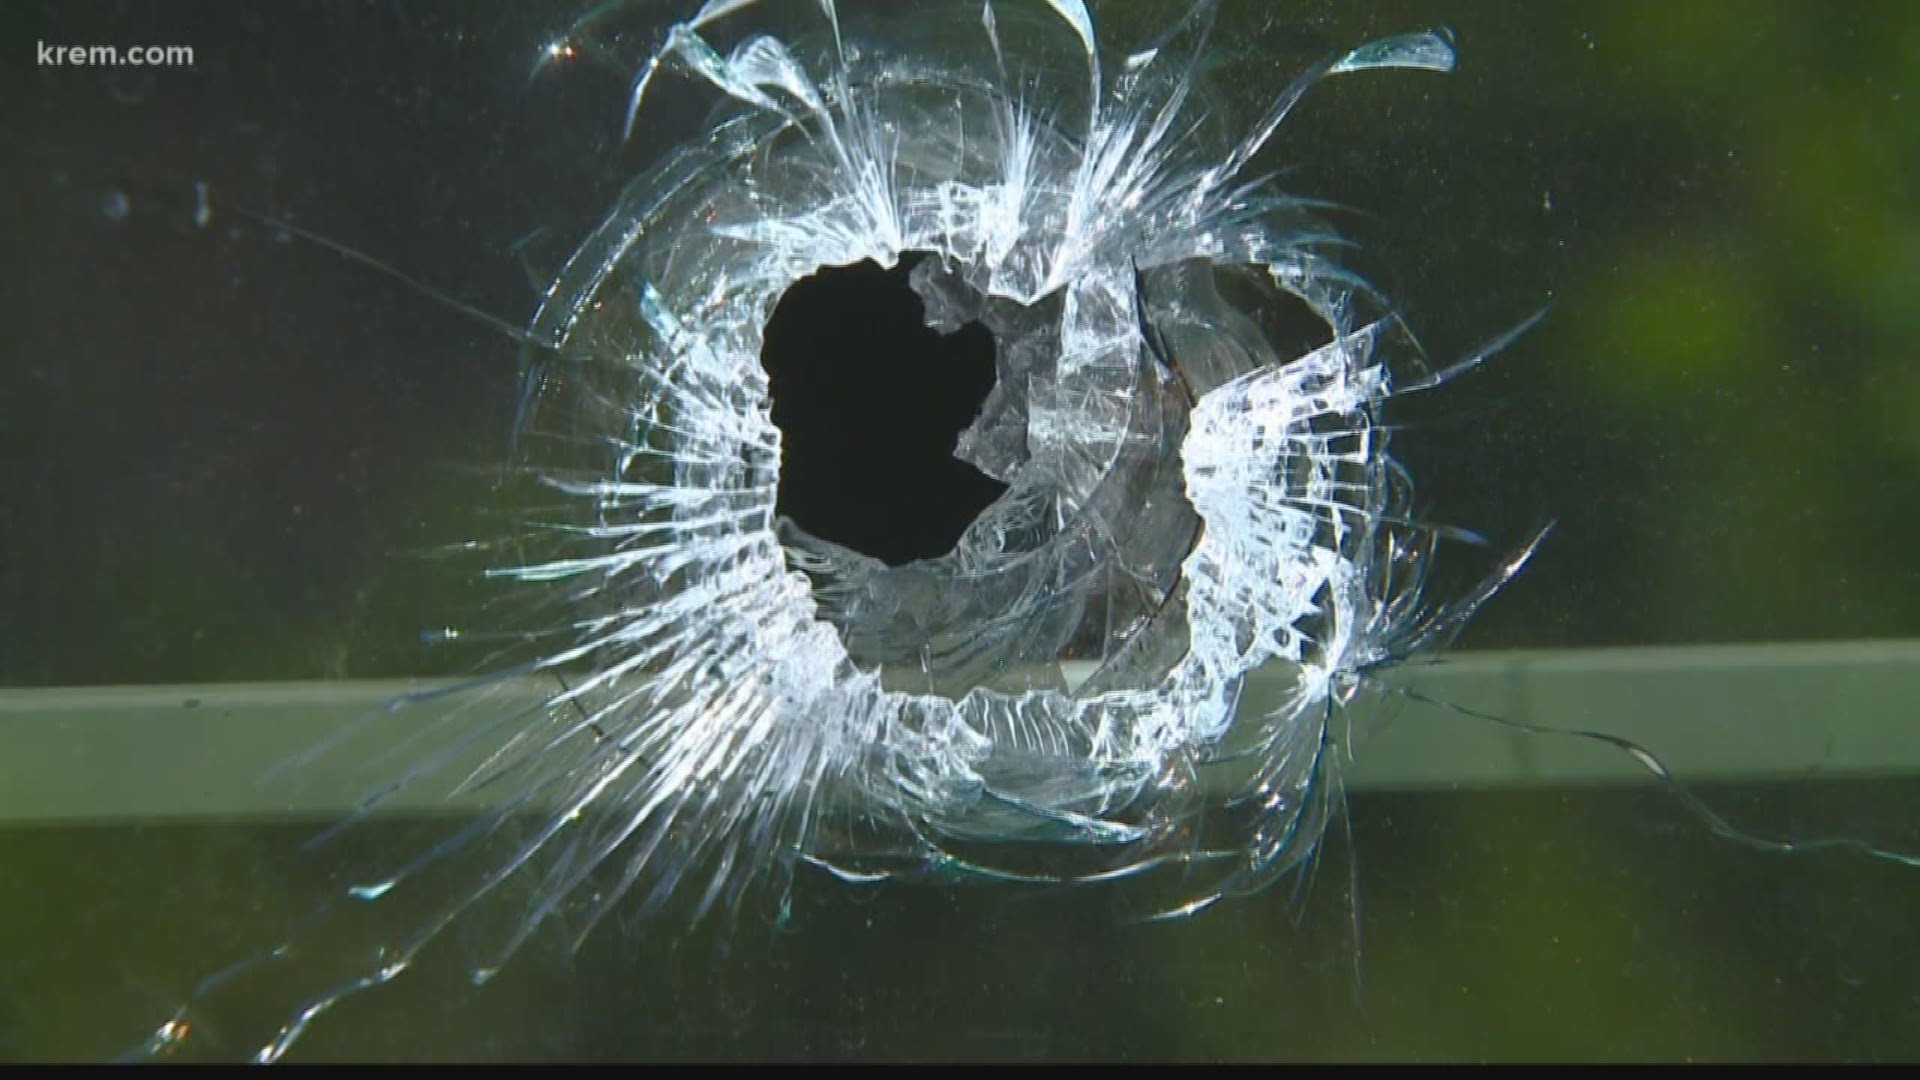 KREM's Amanda Roley spoke with SpokAnimal leaders, who say vandals tried to break into the shelter's veterinary clinic on Sunday night and left nearly $1,000 worth of damage in their wake.